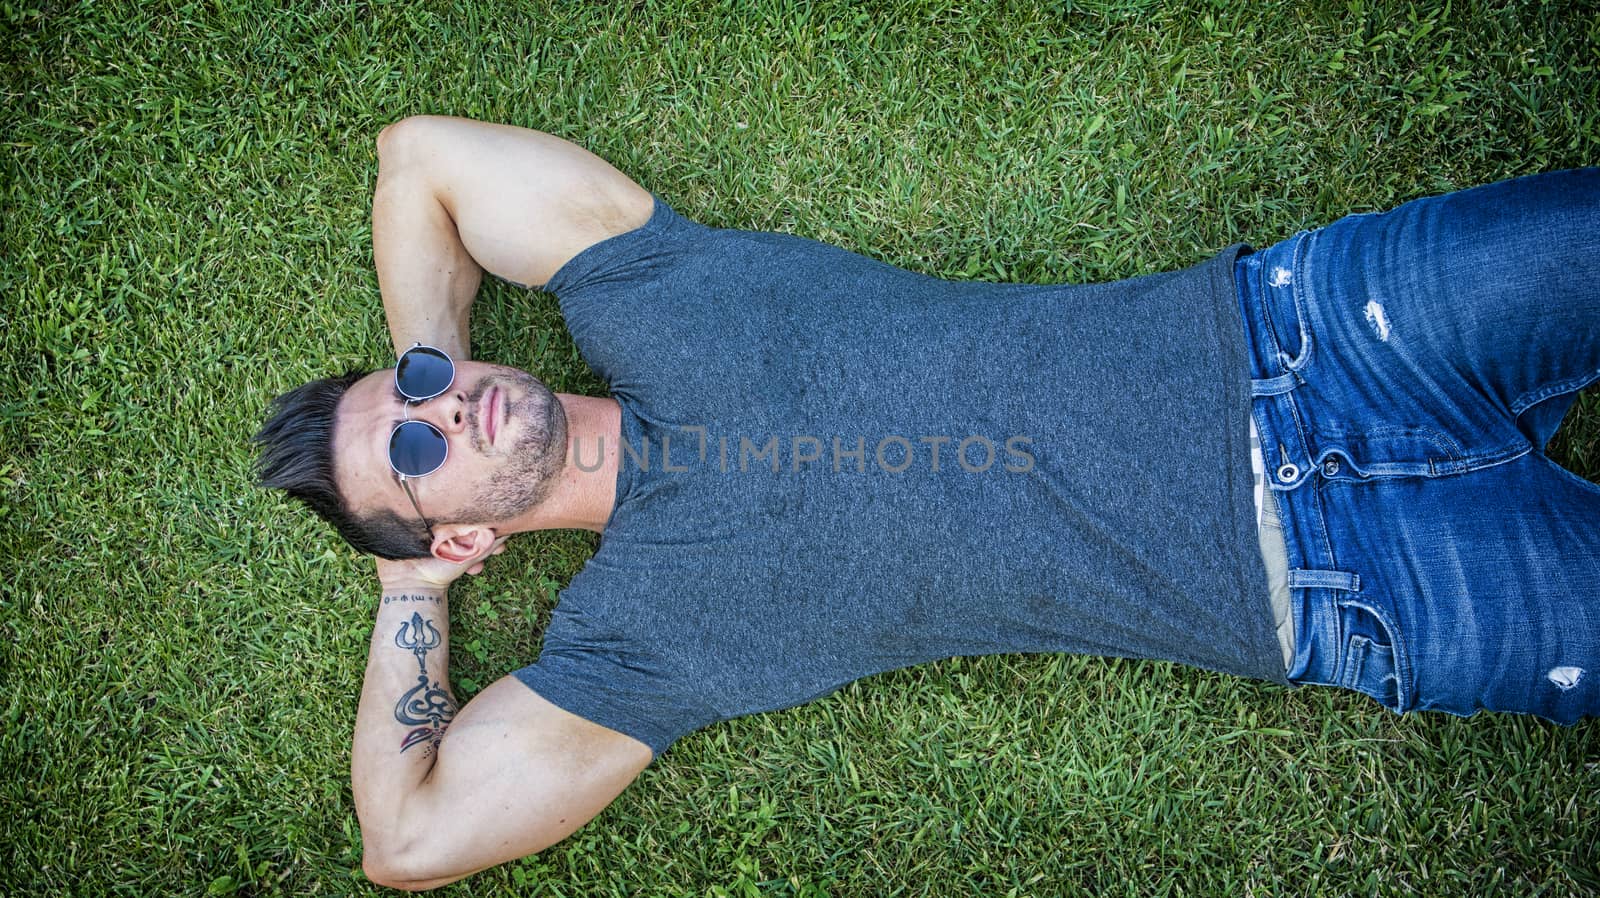 Good looking, fit male model relaxing lying on the grass, looking at camera, photographed right from above